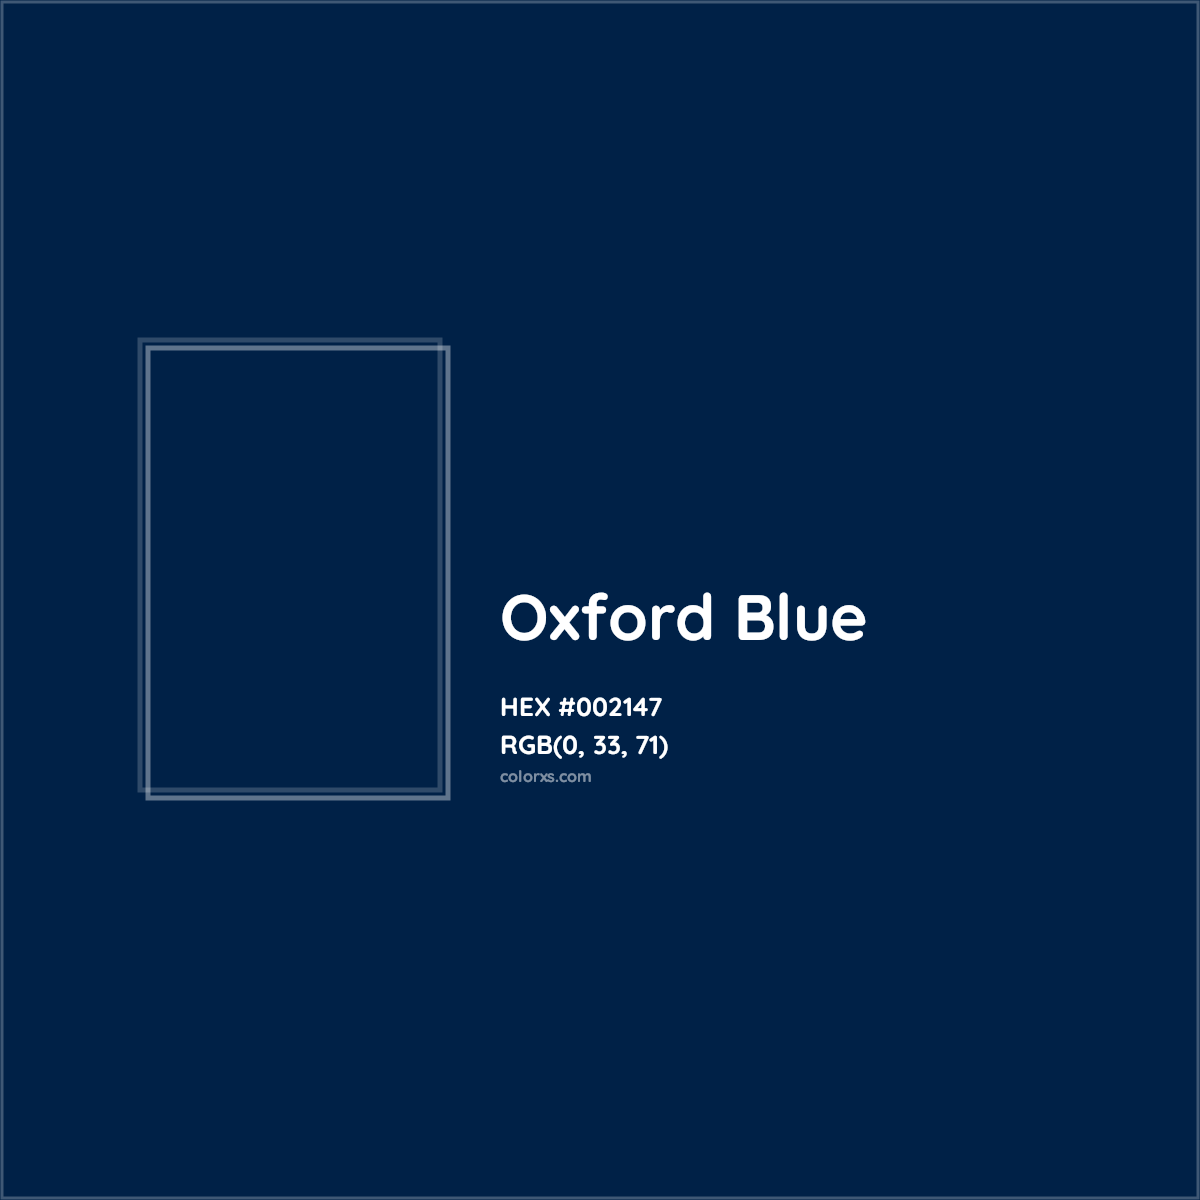 HEX #002147 Oxford Blue Other School - Color Code